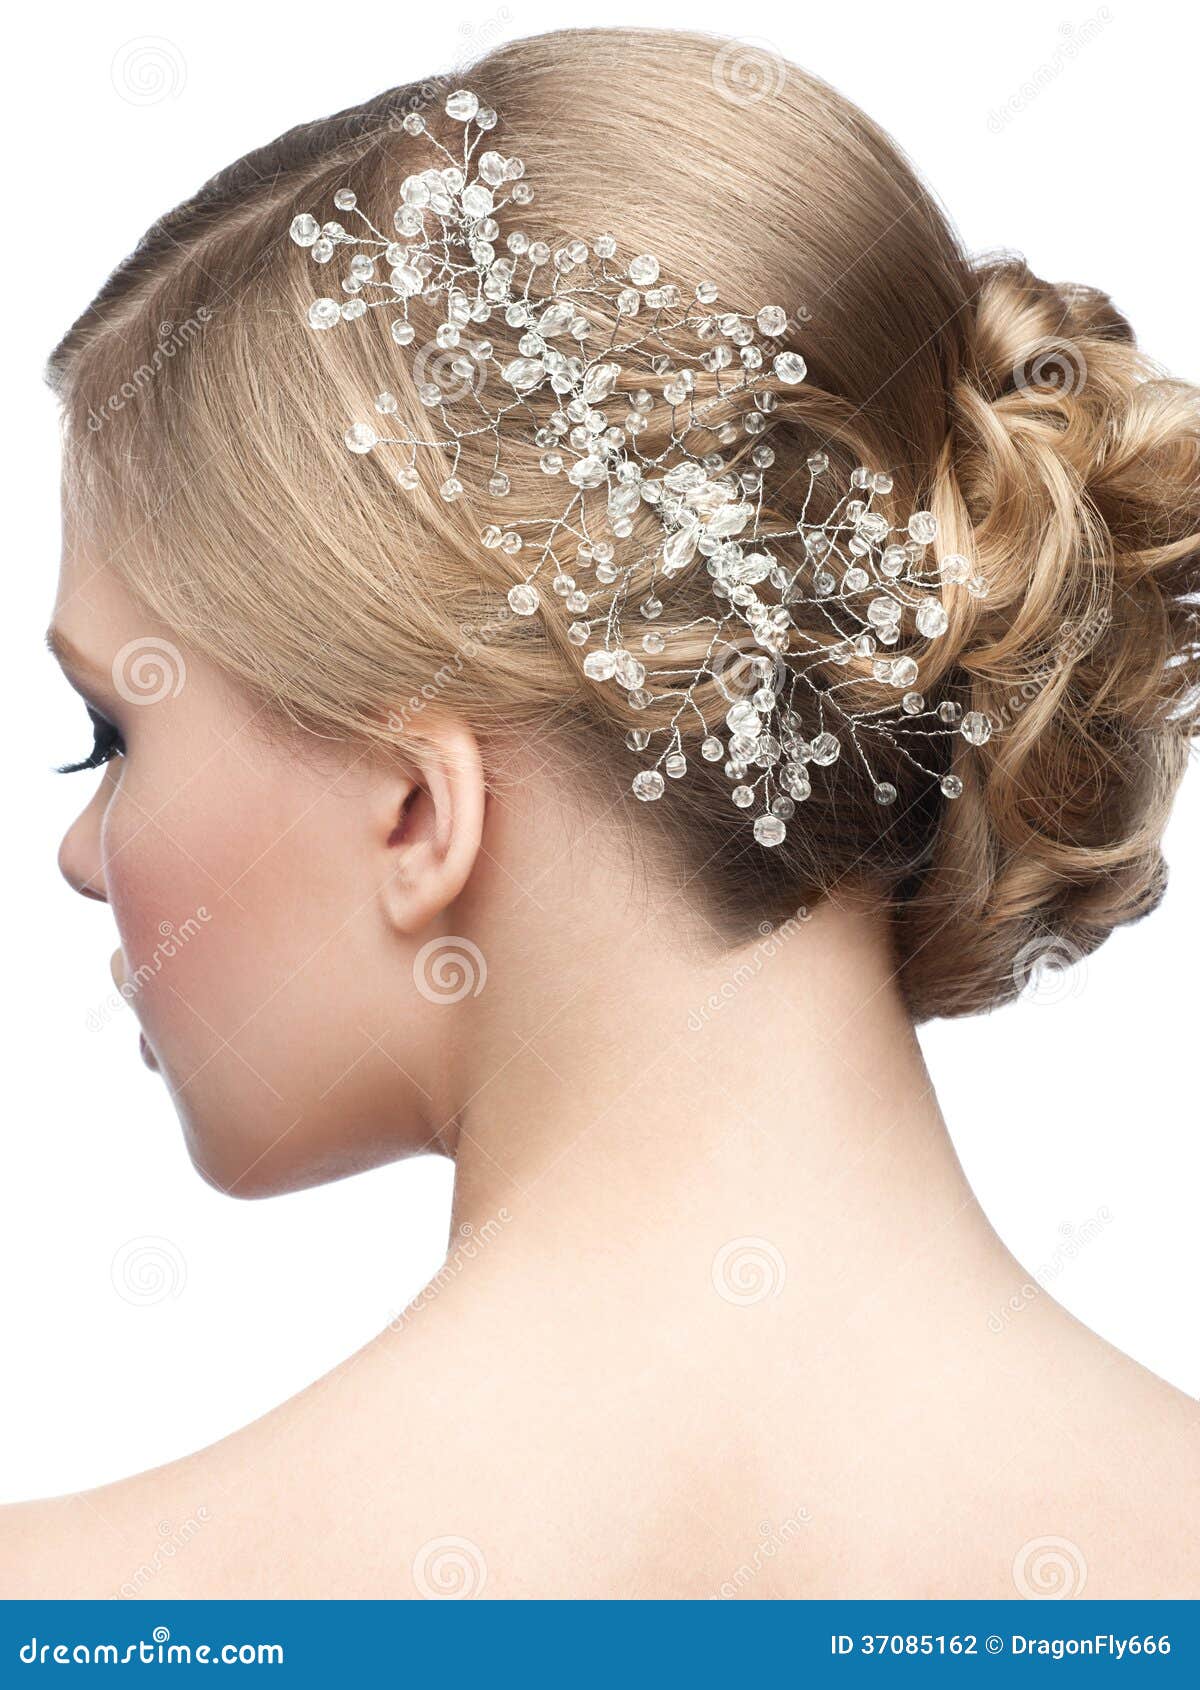 hairstyle with hair accessory